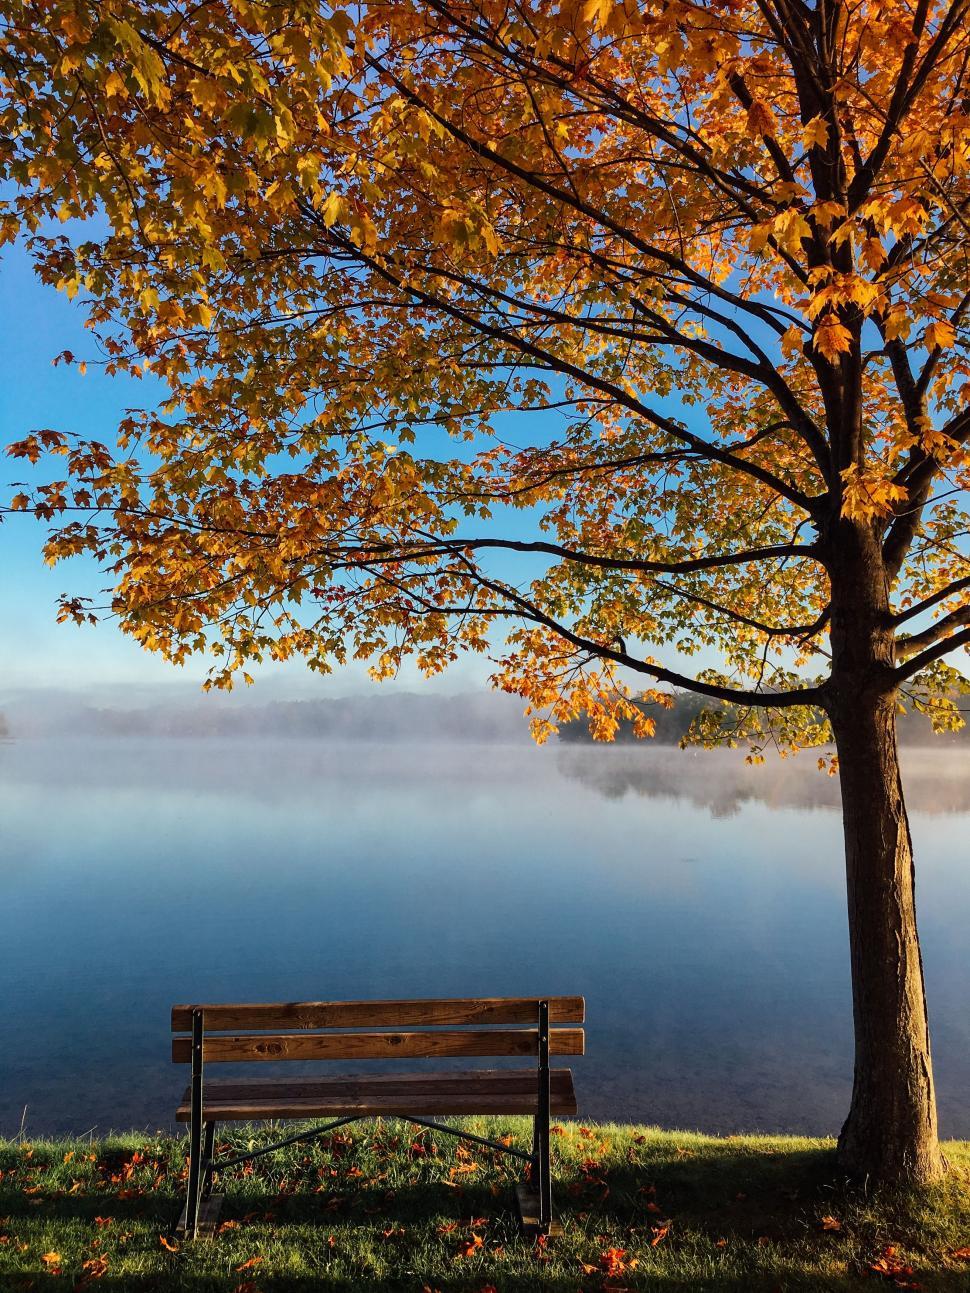 Free Image of Wooden Bench by Tree Next to Lake 